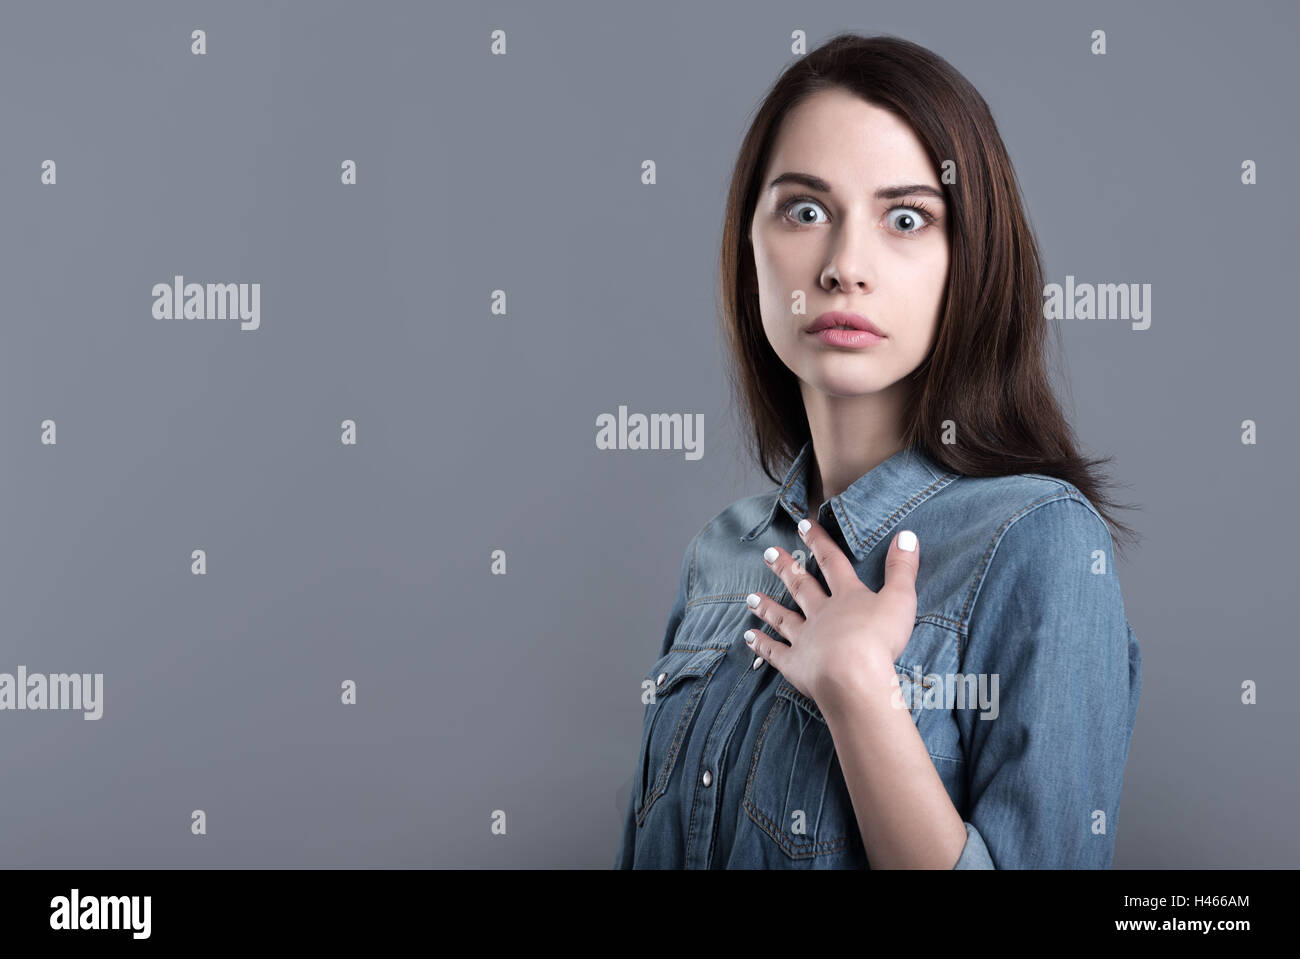 Surprised and confused young woman Stock Photo